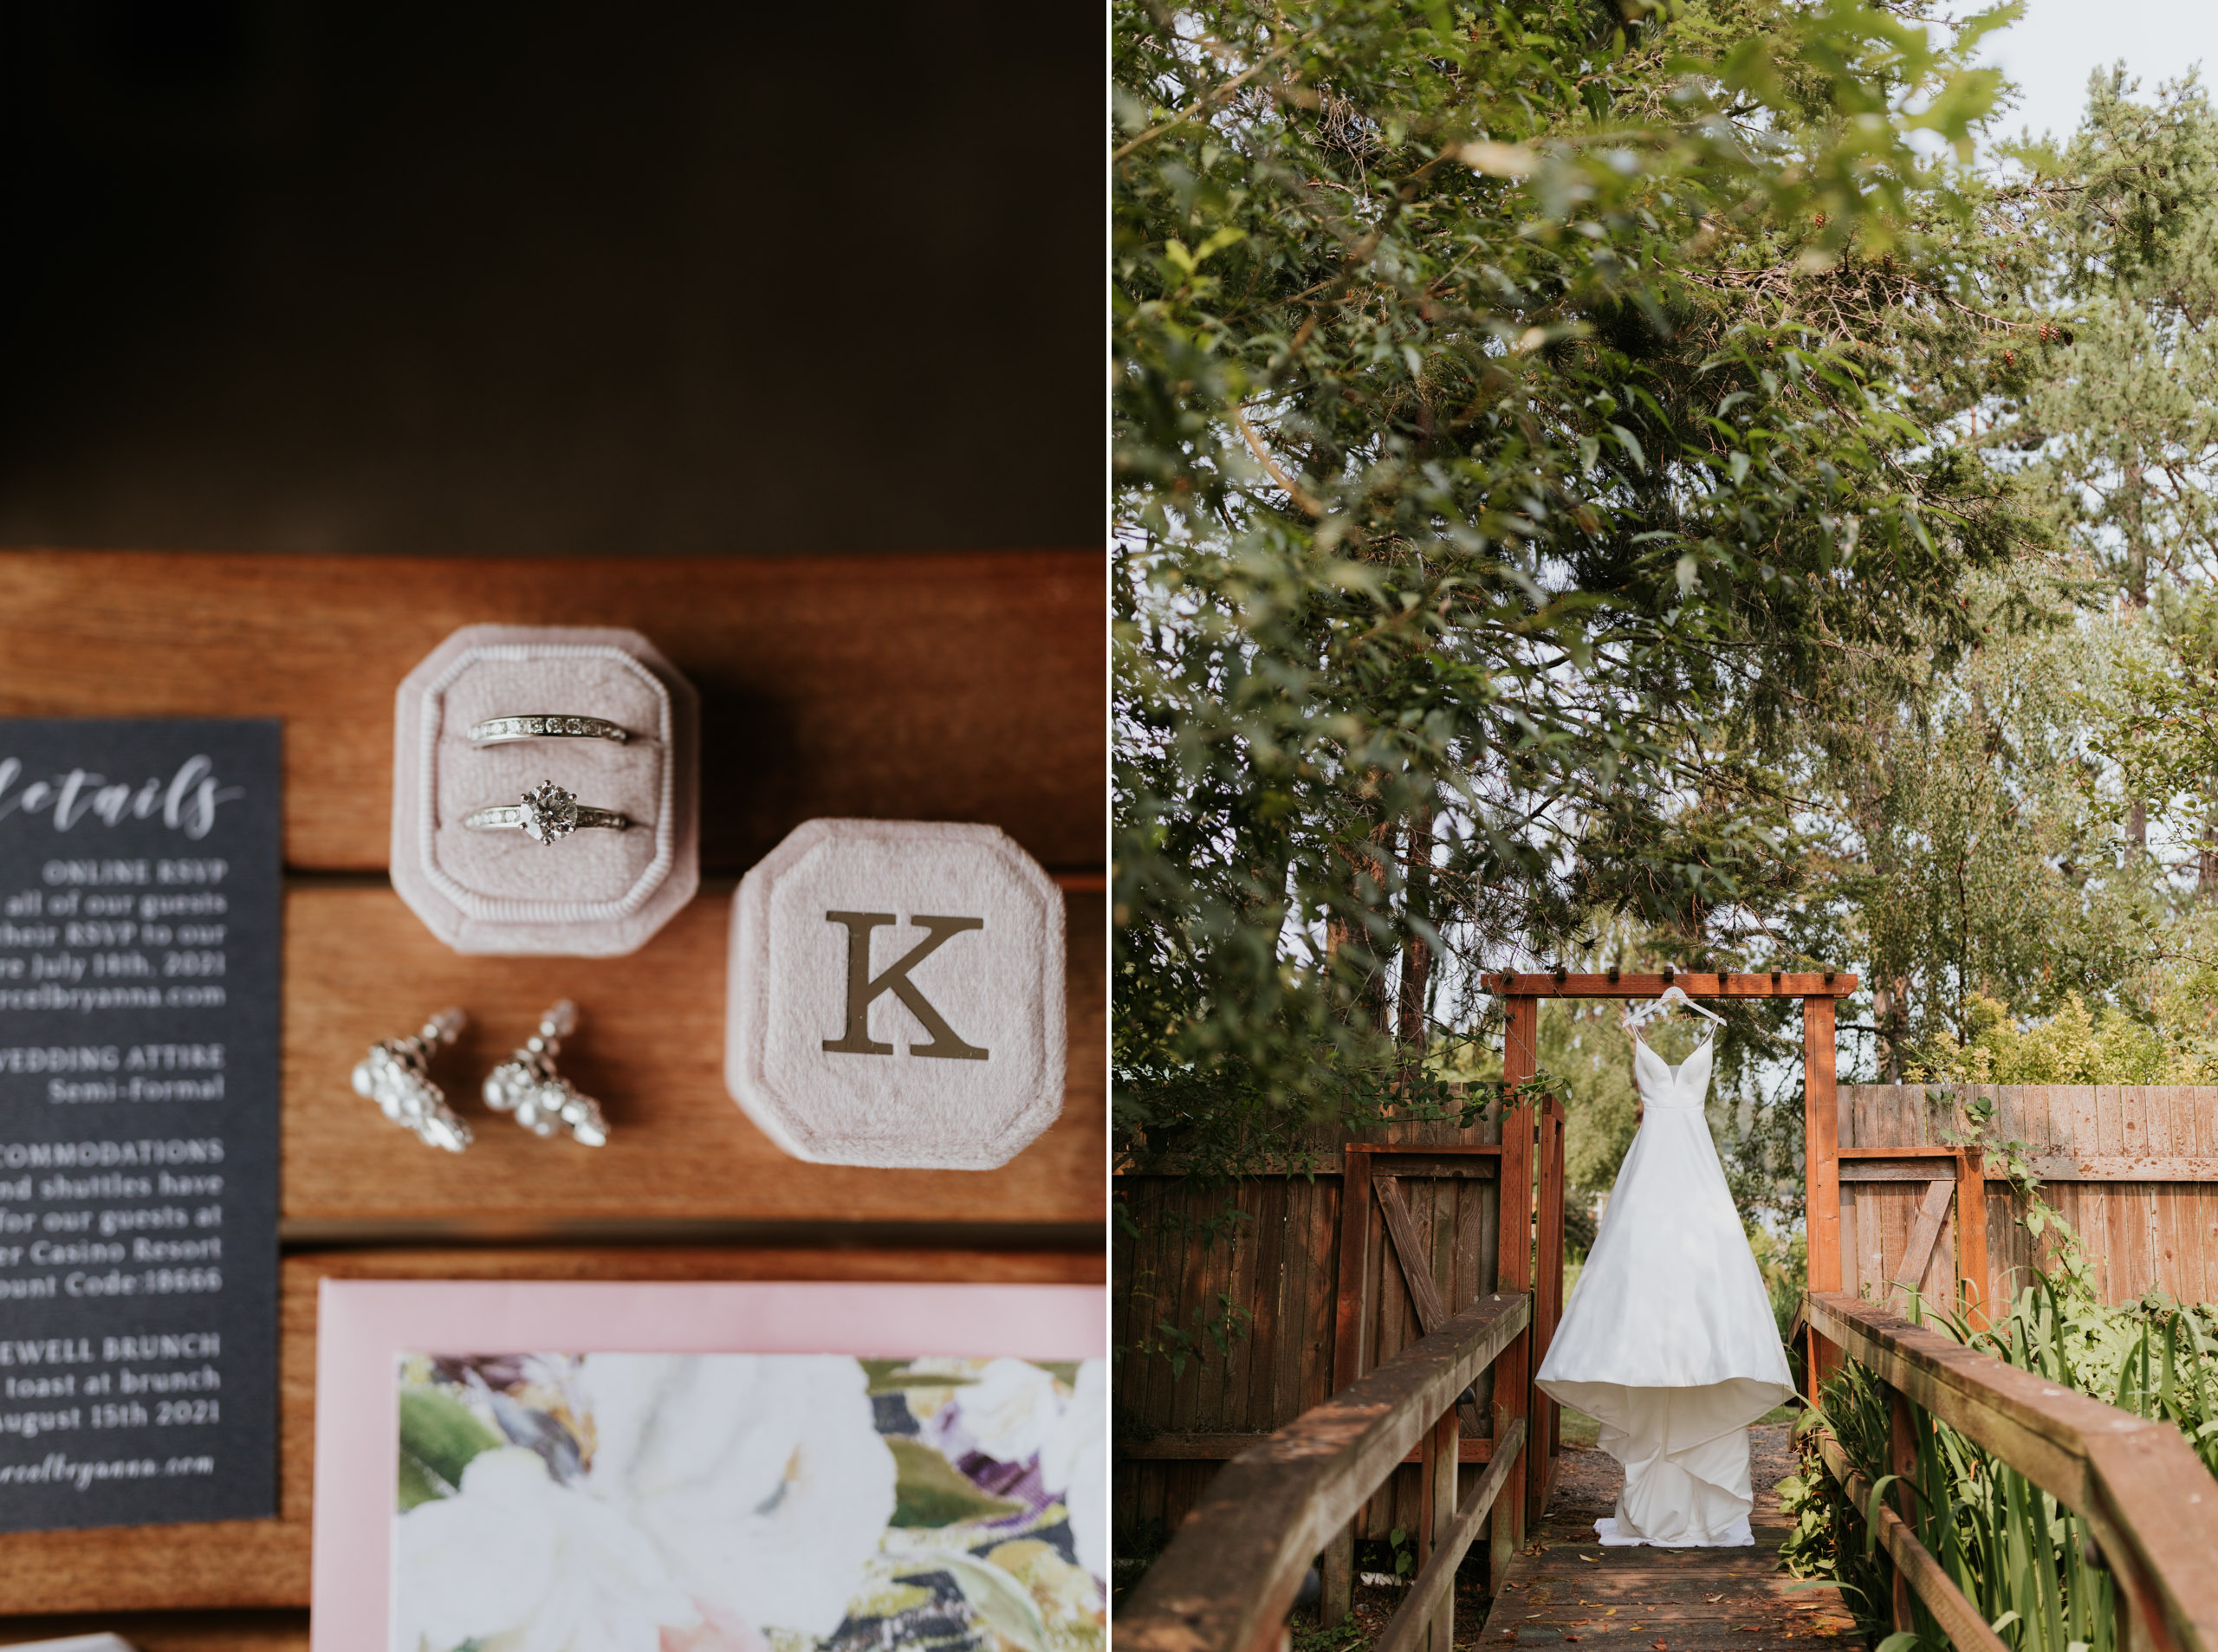 https://breannapluskevin.com/wp-content/uploads/photo-gallery/imported_from_media_libray/kiana-lodge-wedding-bm-breanna-plus-kevin-06.jpg